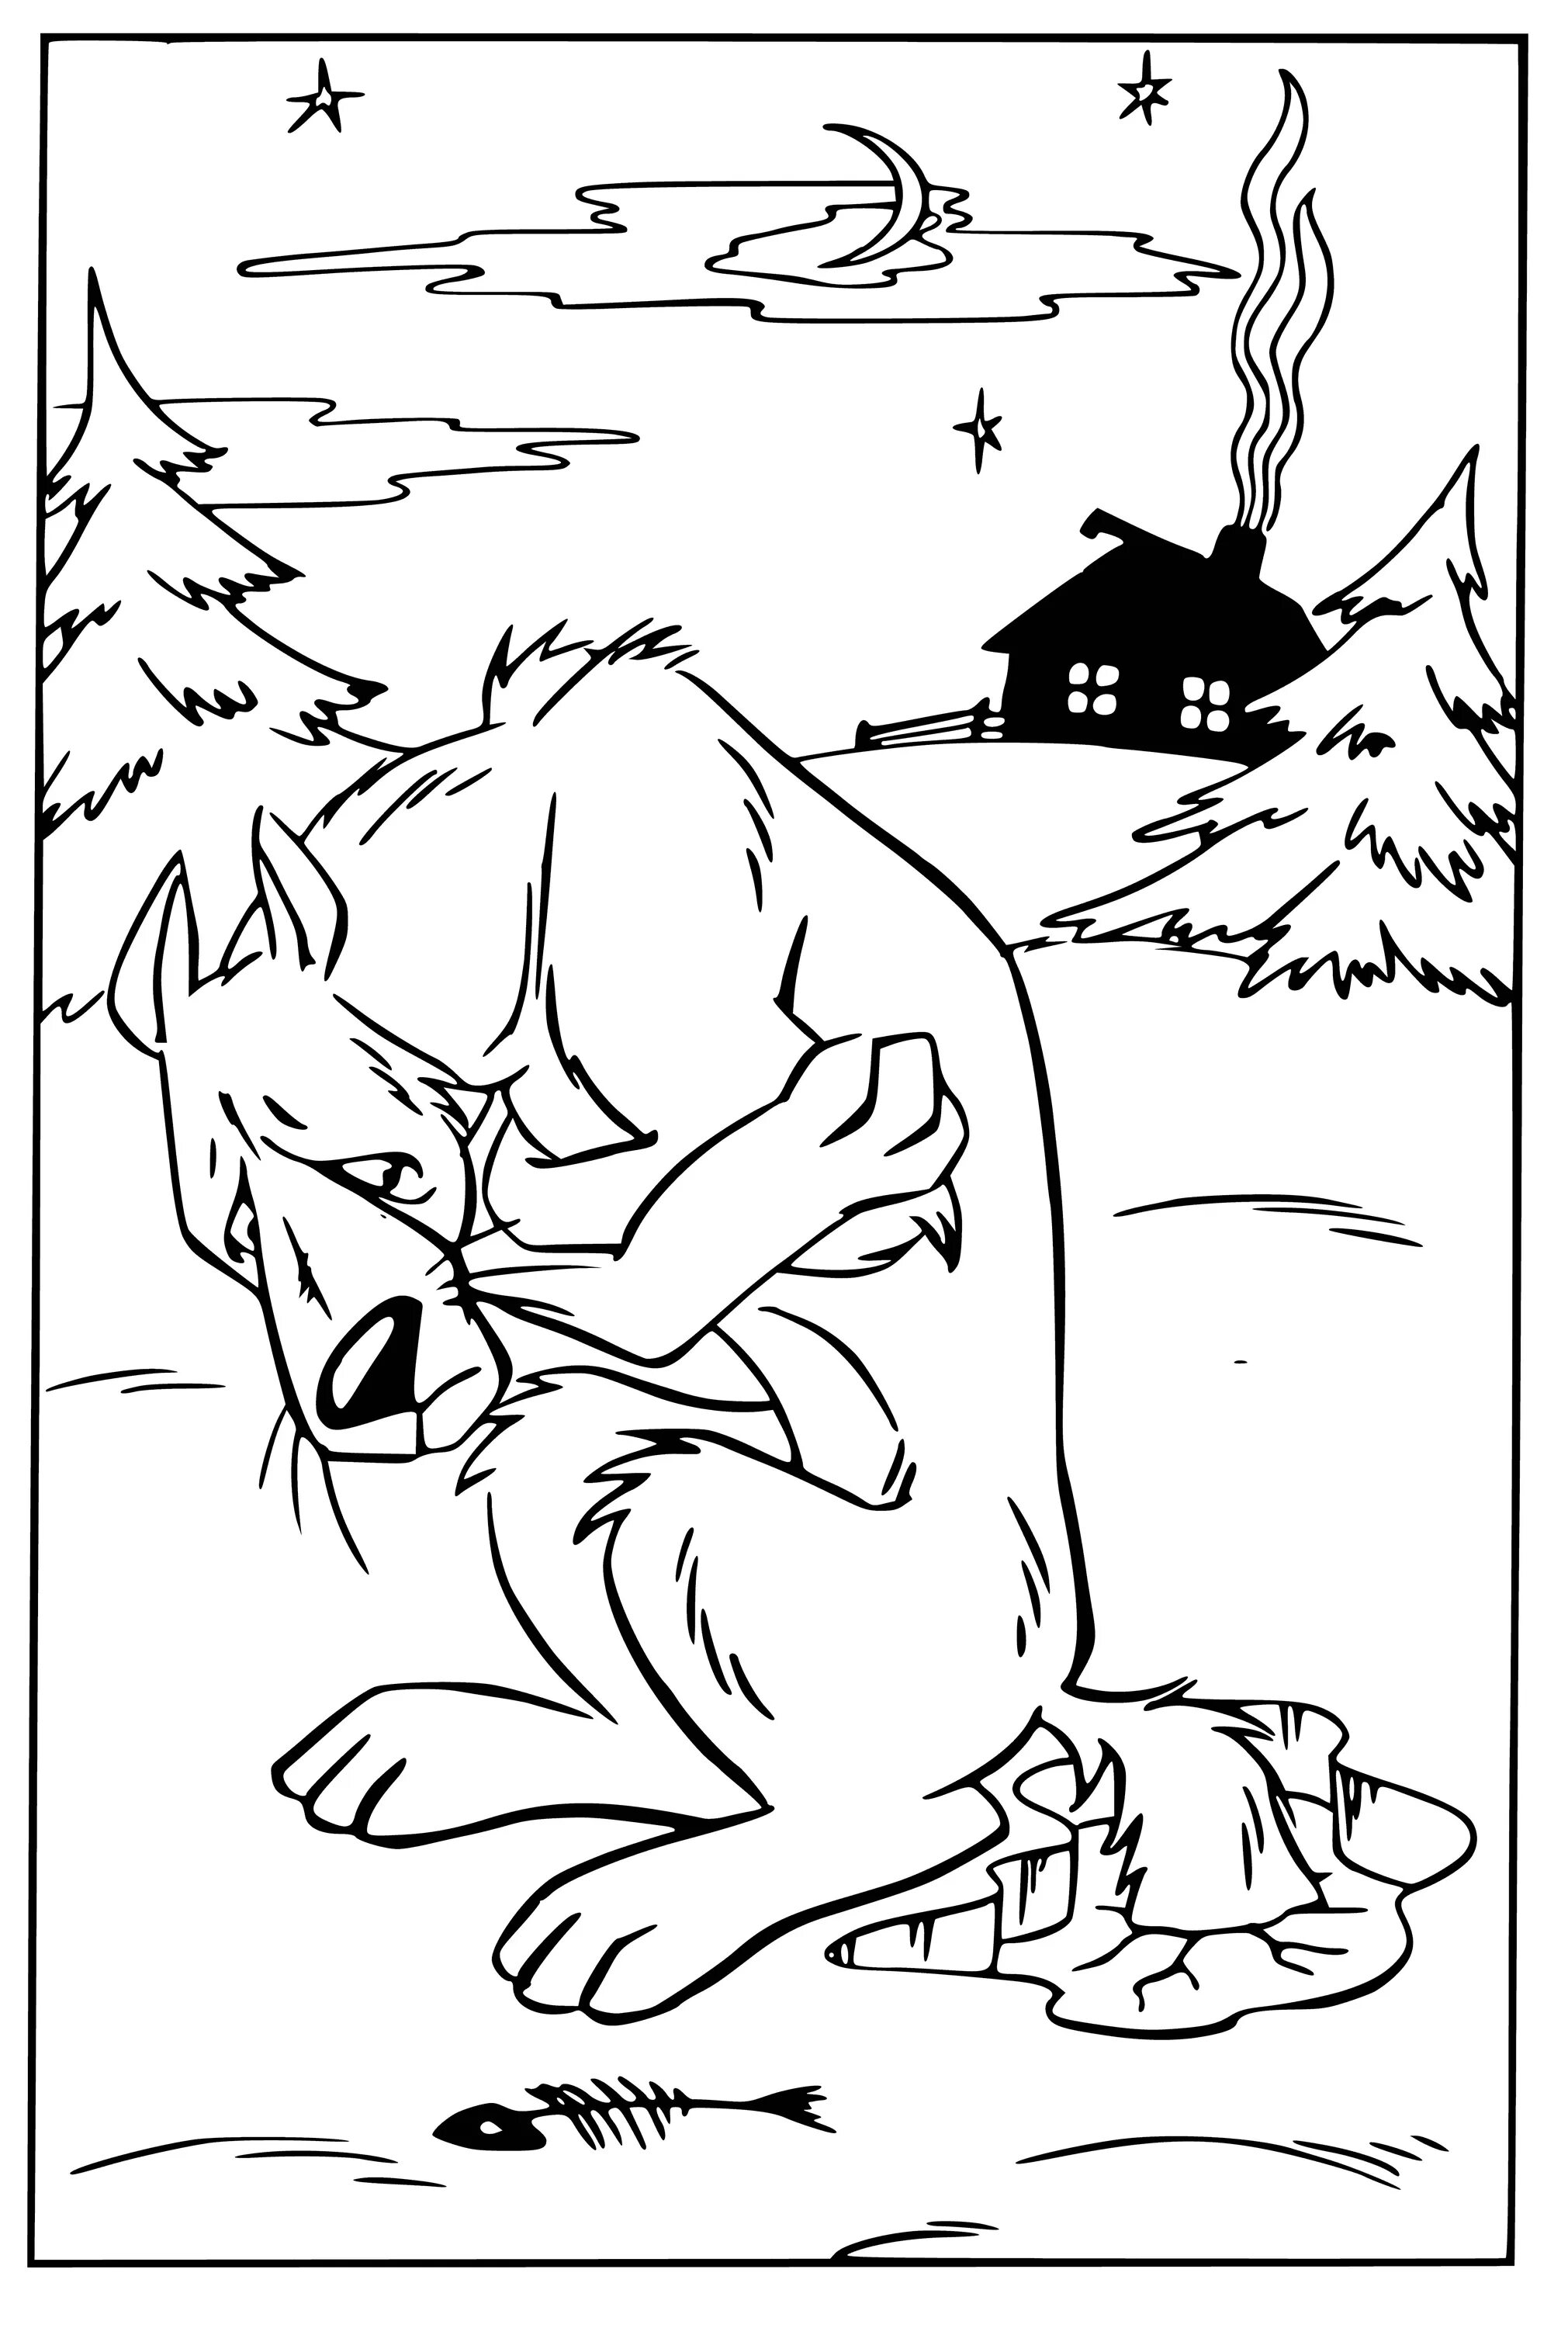 A fun fox and wolf coloring book for kids